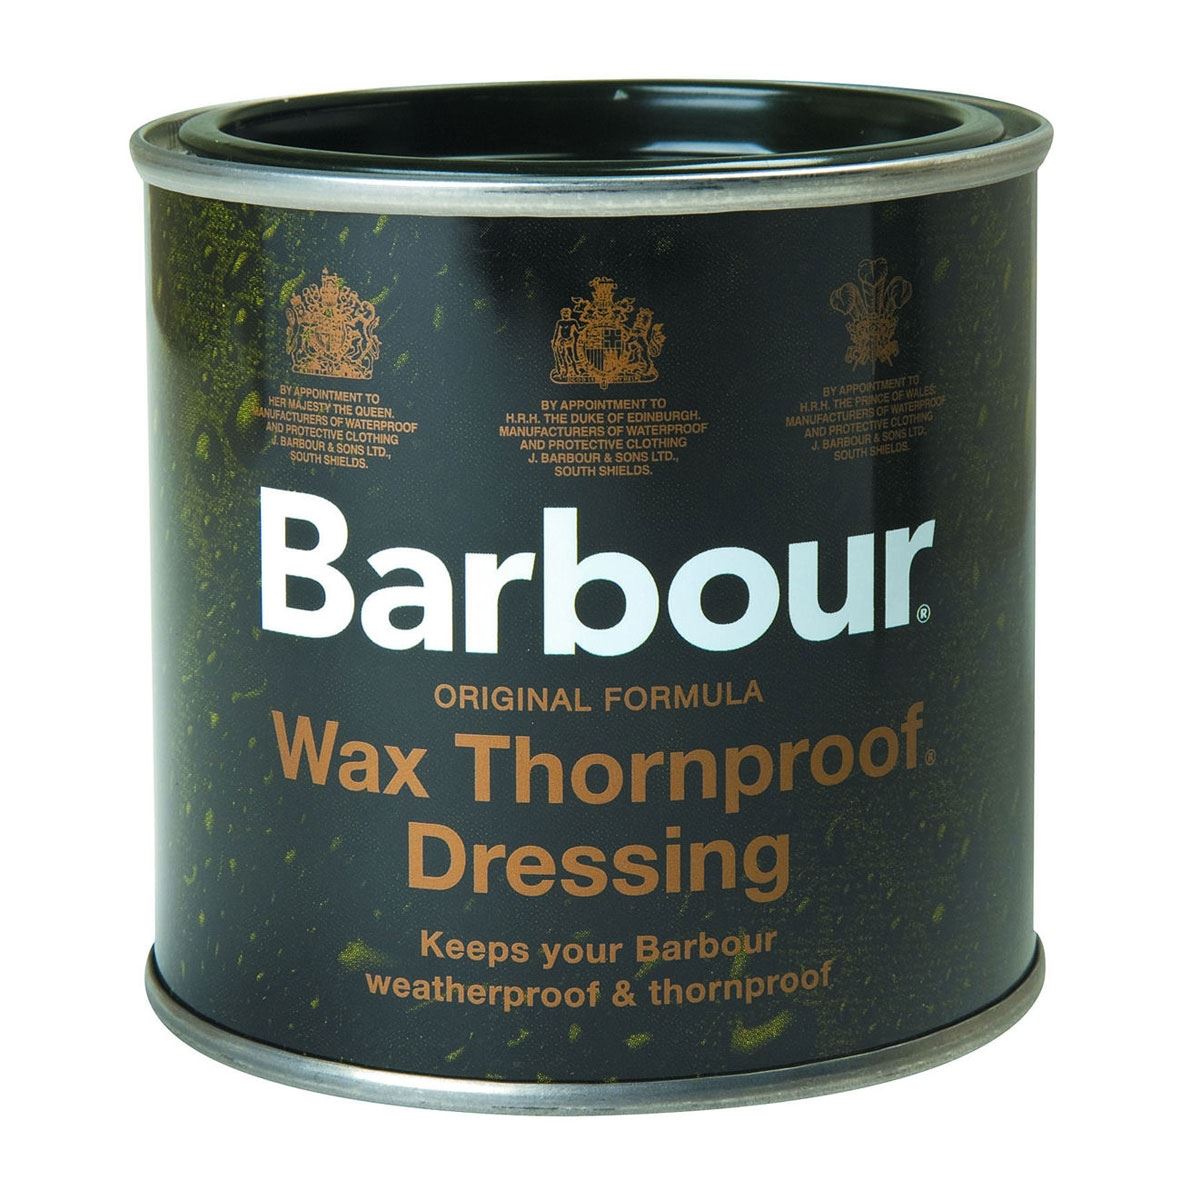 What is the reputation of Barbour wax jackets when it comes to the Barbour Wax Thornproof Dressing?